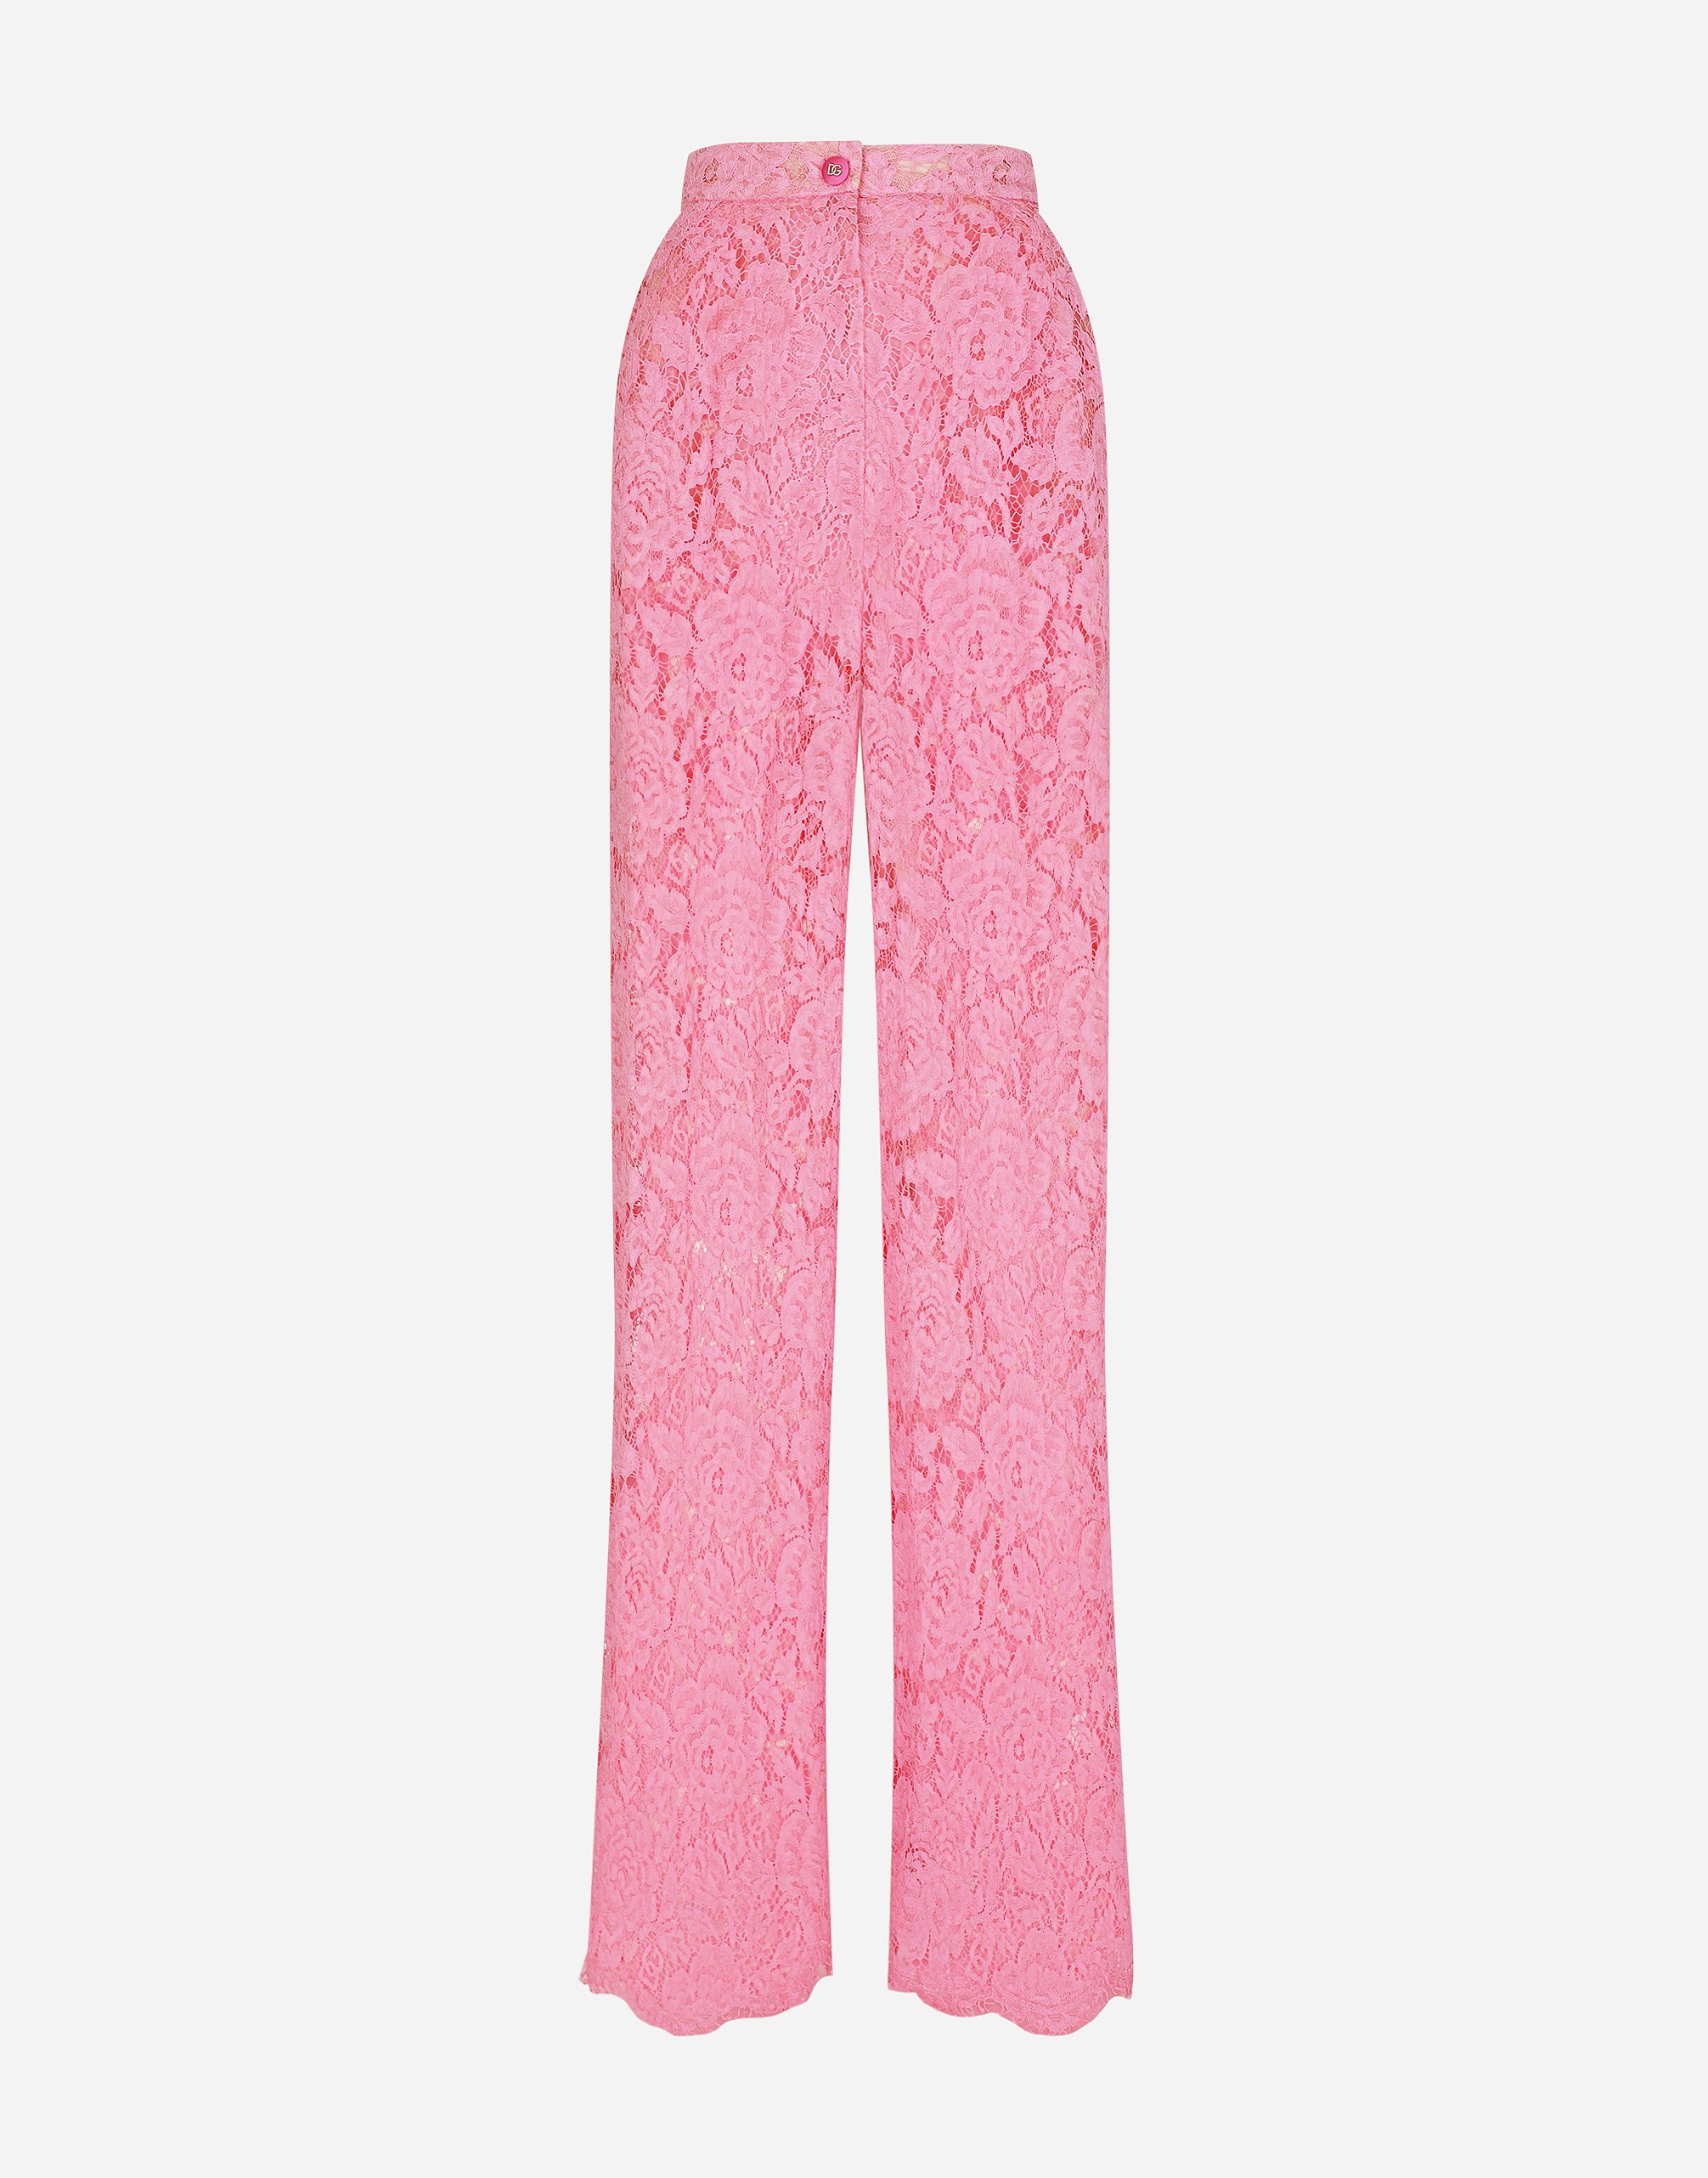 Flared branded stretch lace pants in Pink for Women